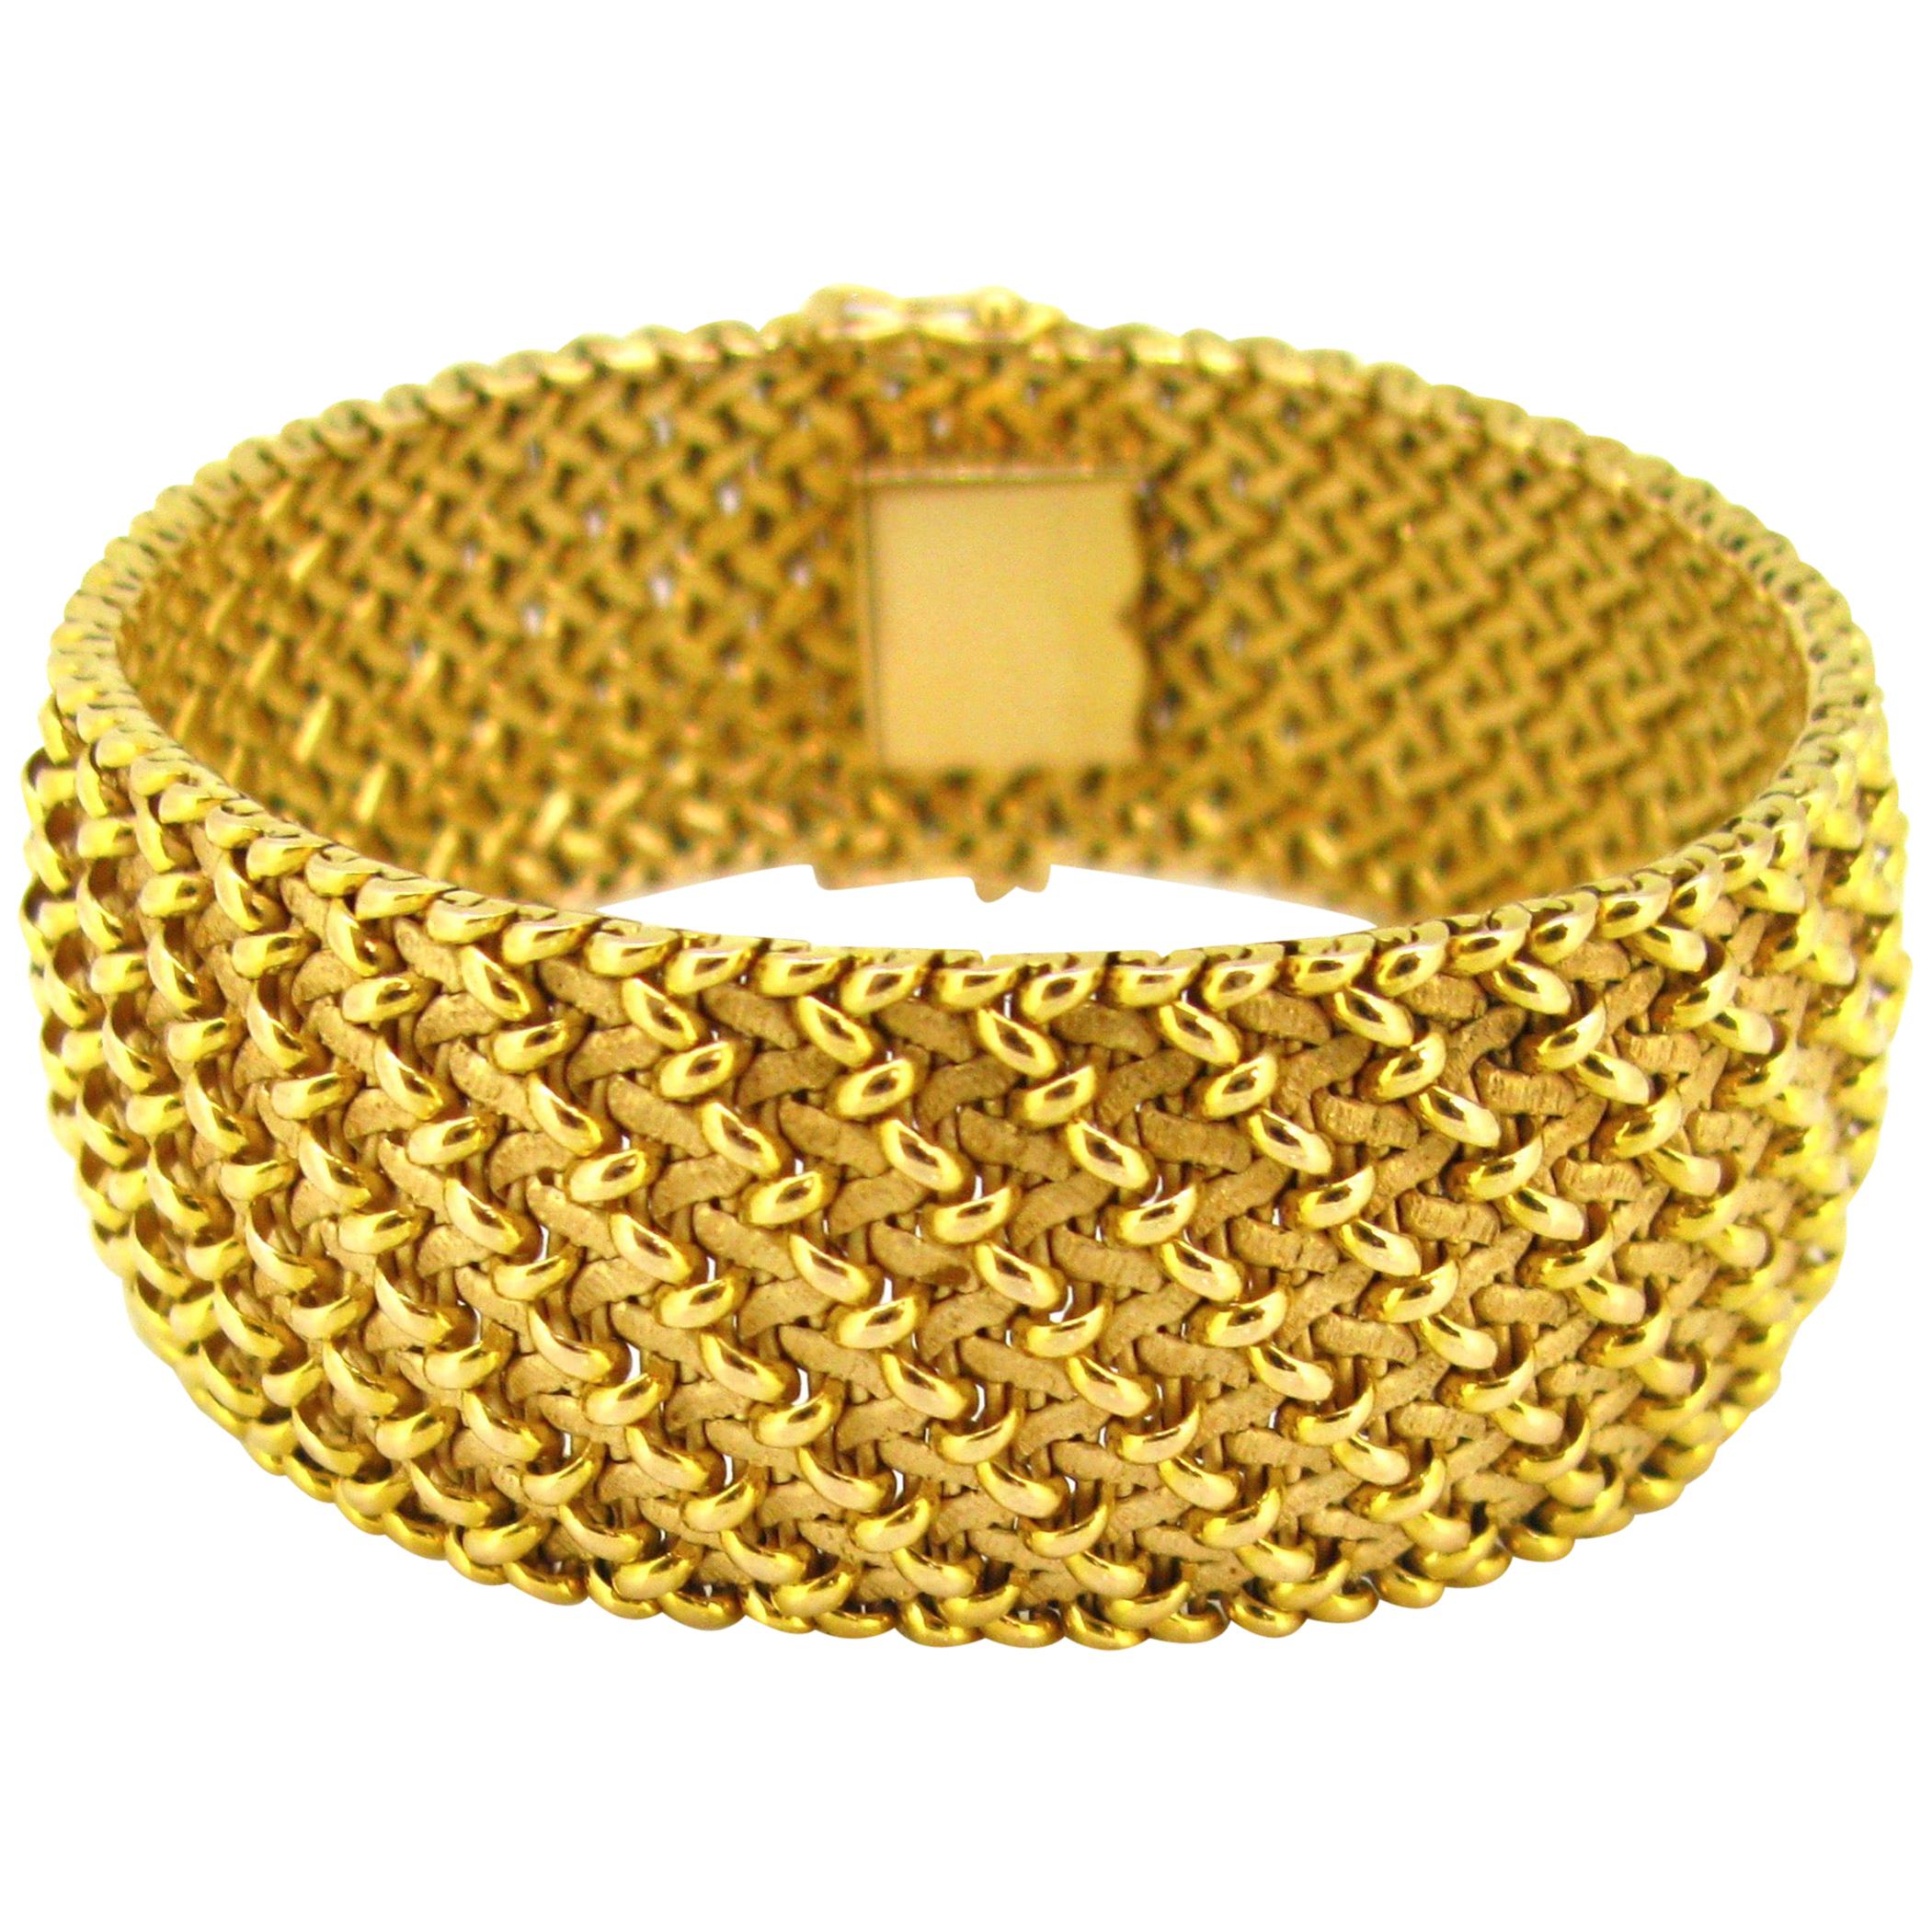 Woven Mesh Large Textured Yellow Gold Cuff Bracelet